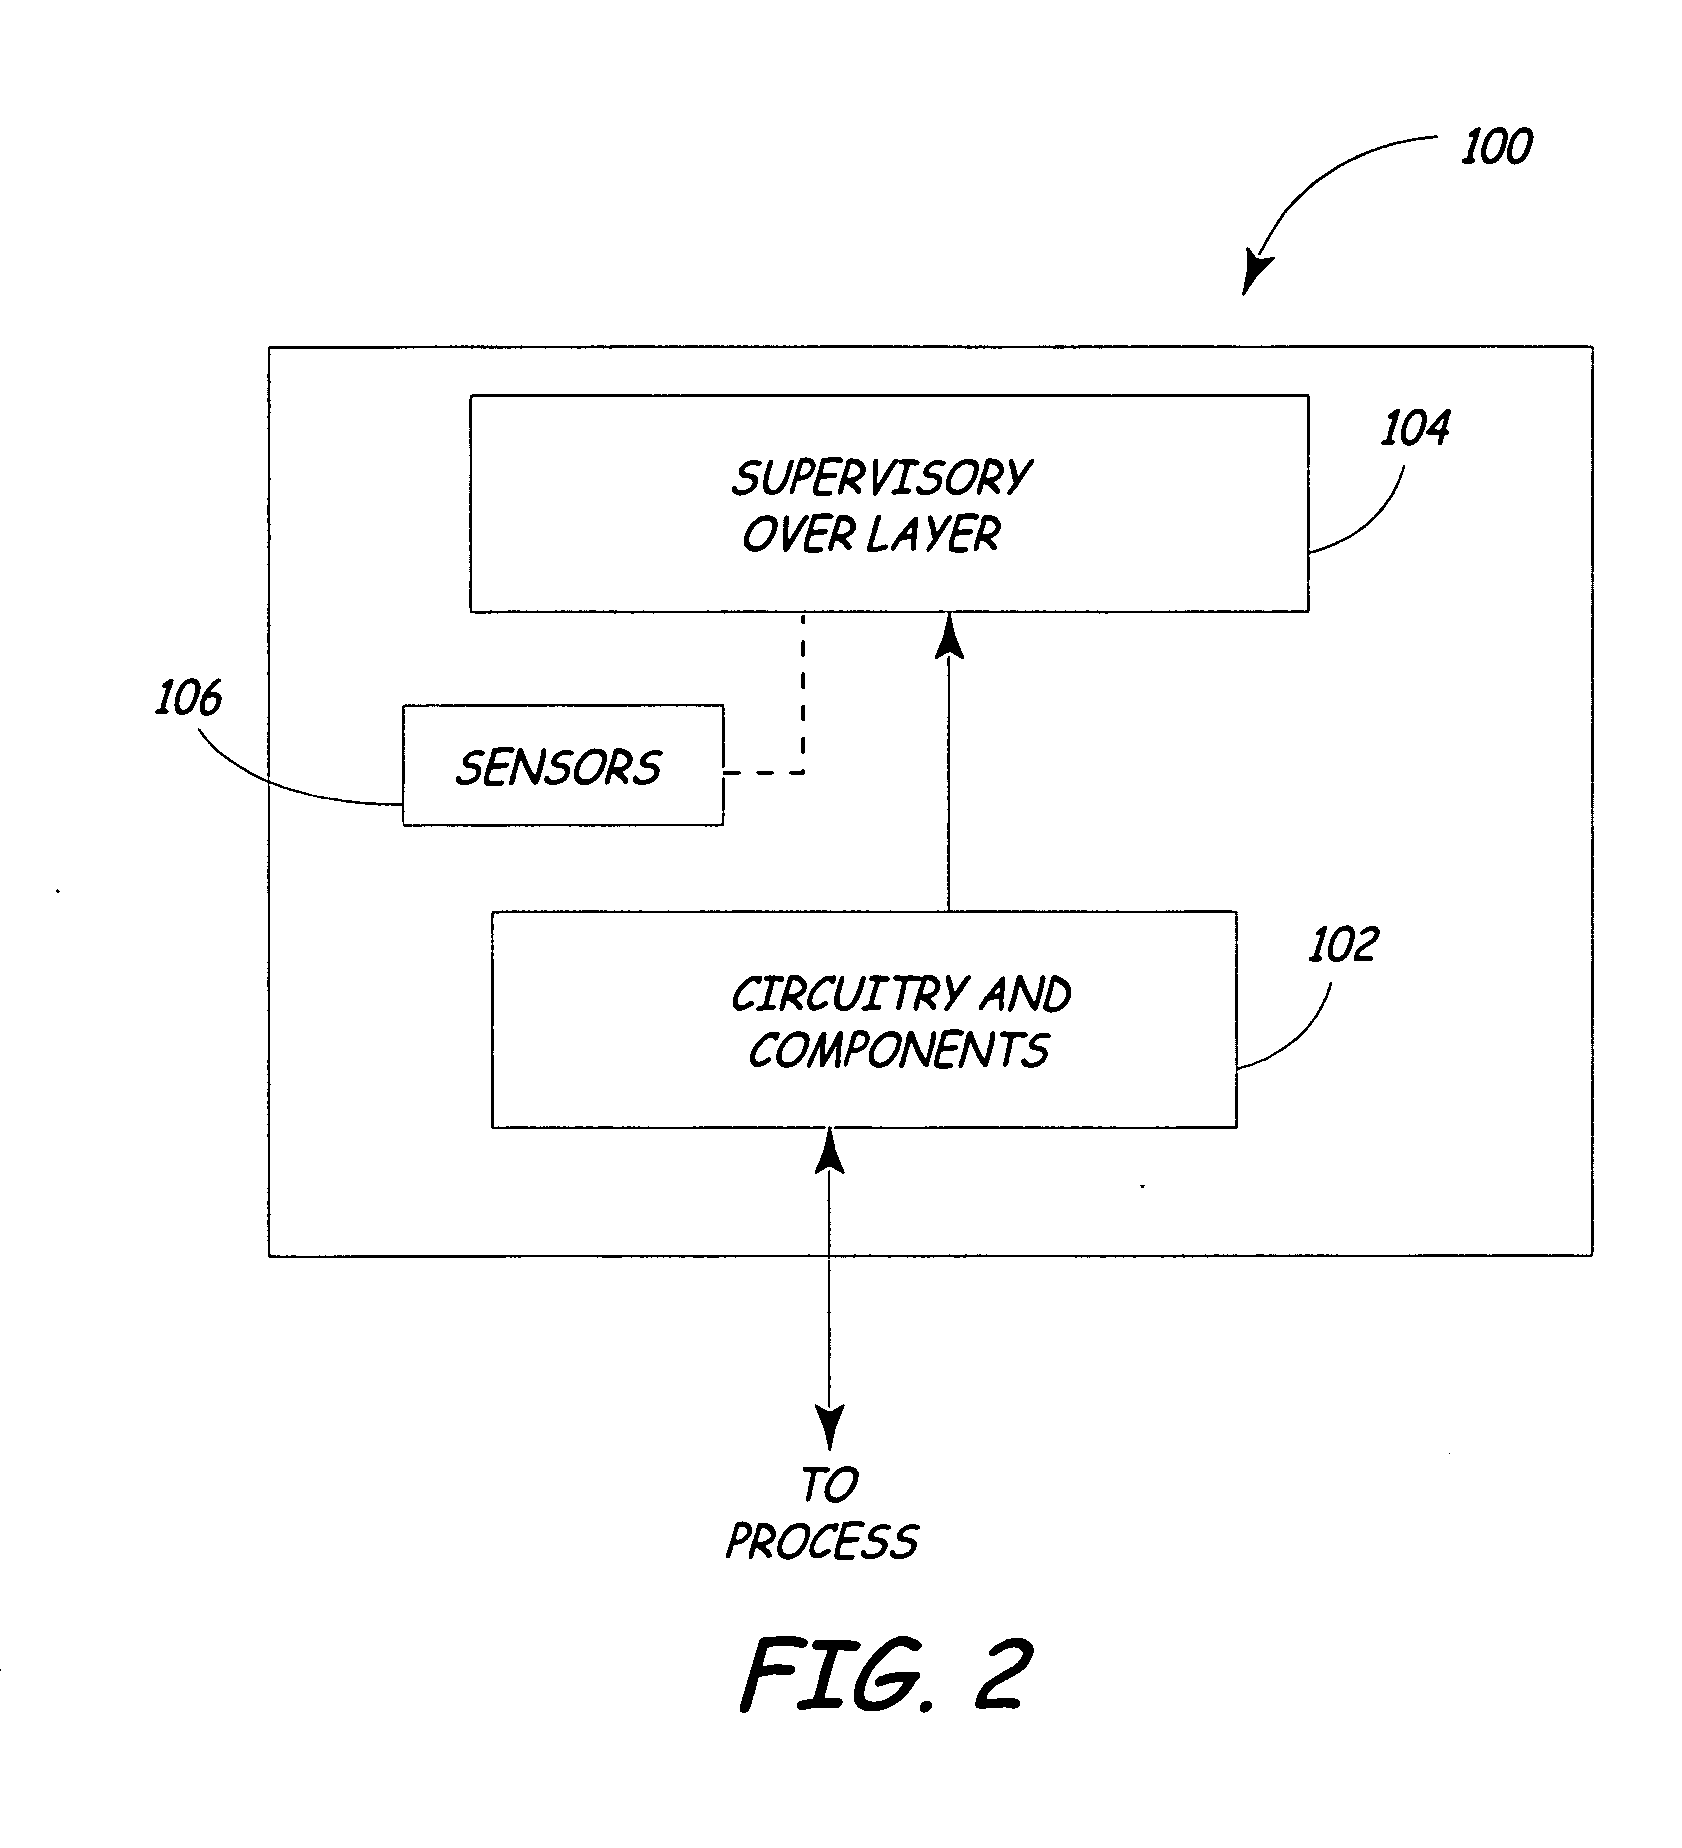 Process device with supervisory overlayer